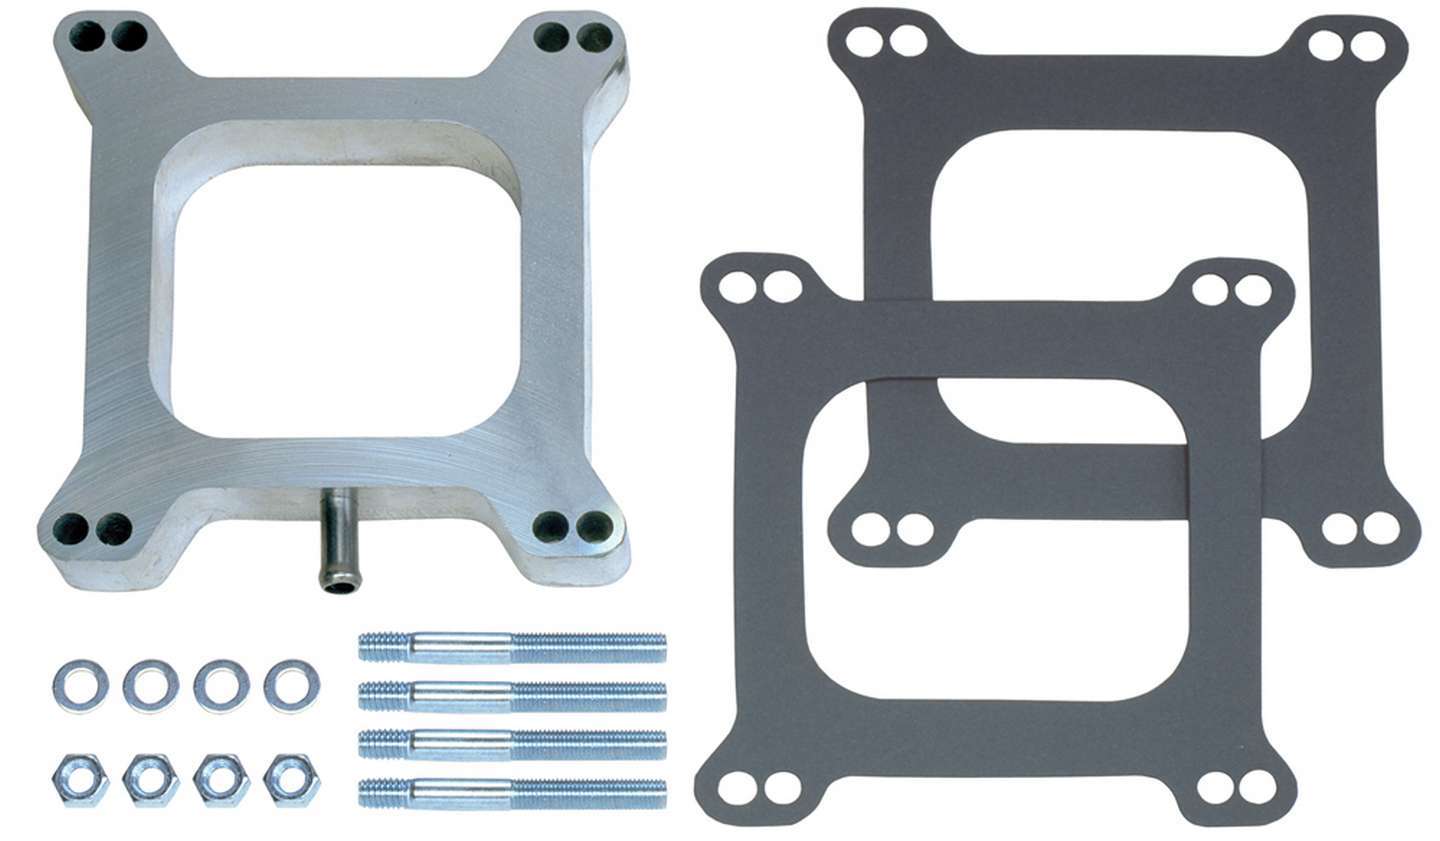 Trans Dapt 2103 Carburetor Spacer, 1 in Thick, Open, Square Bore, PCV Port, Gasket / Hardware Included, Aluminum, Natural, Each